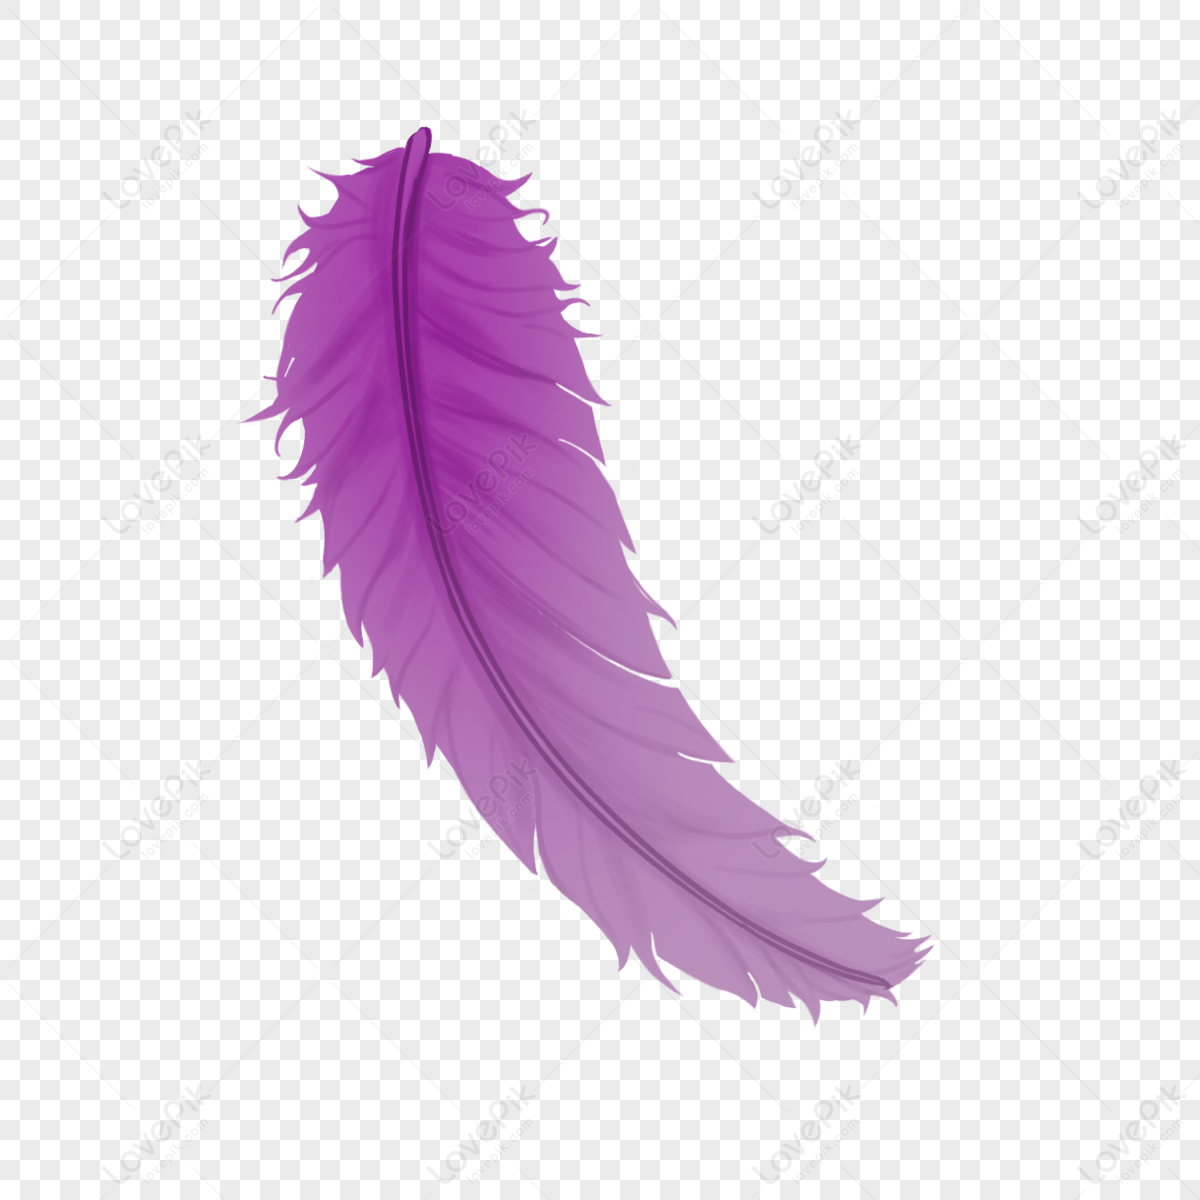 Feather Wings Hd Transparent, Purple Feather Wing, Purple Feather, Feather,  Wing PNG Image For Free Download